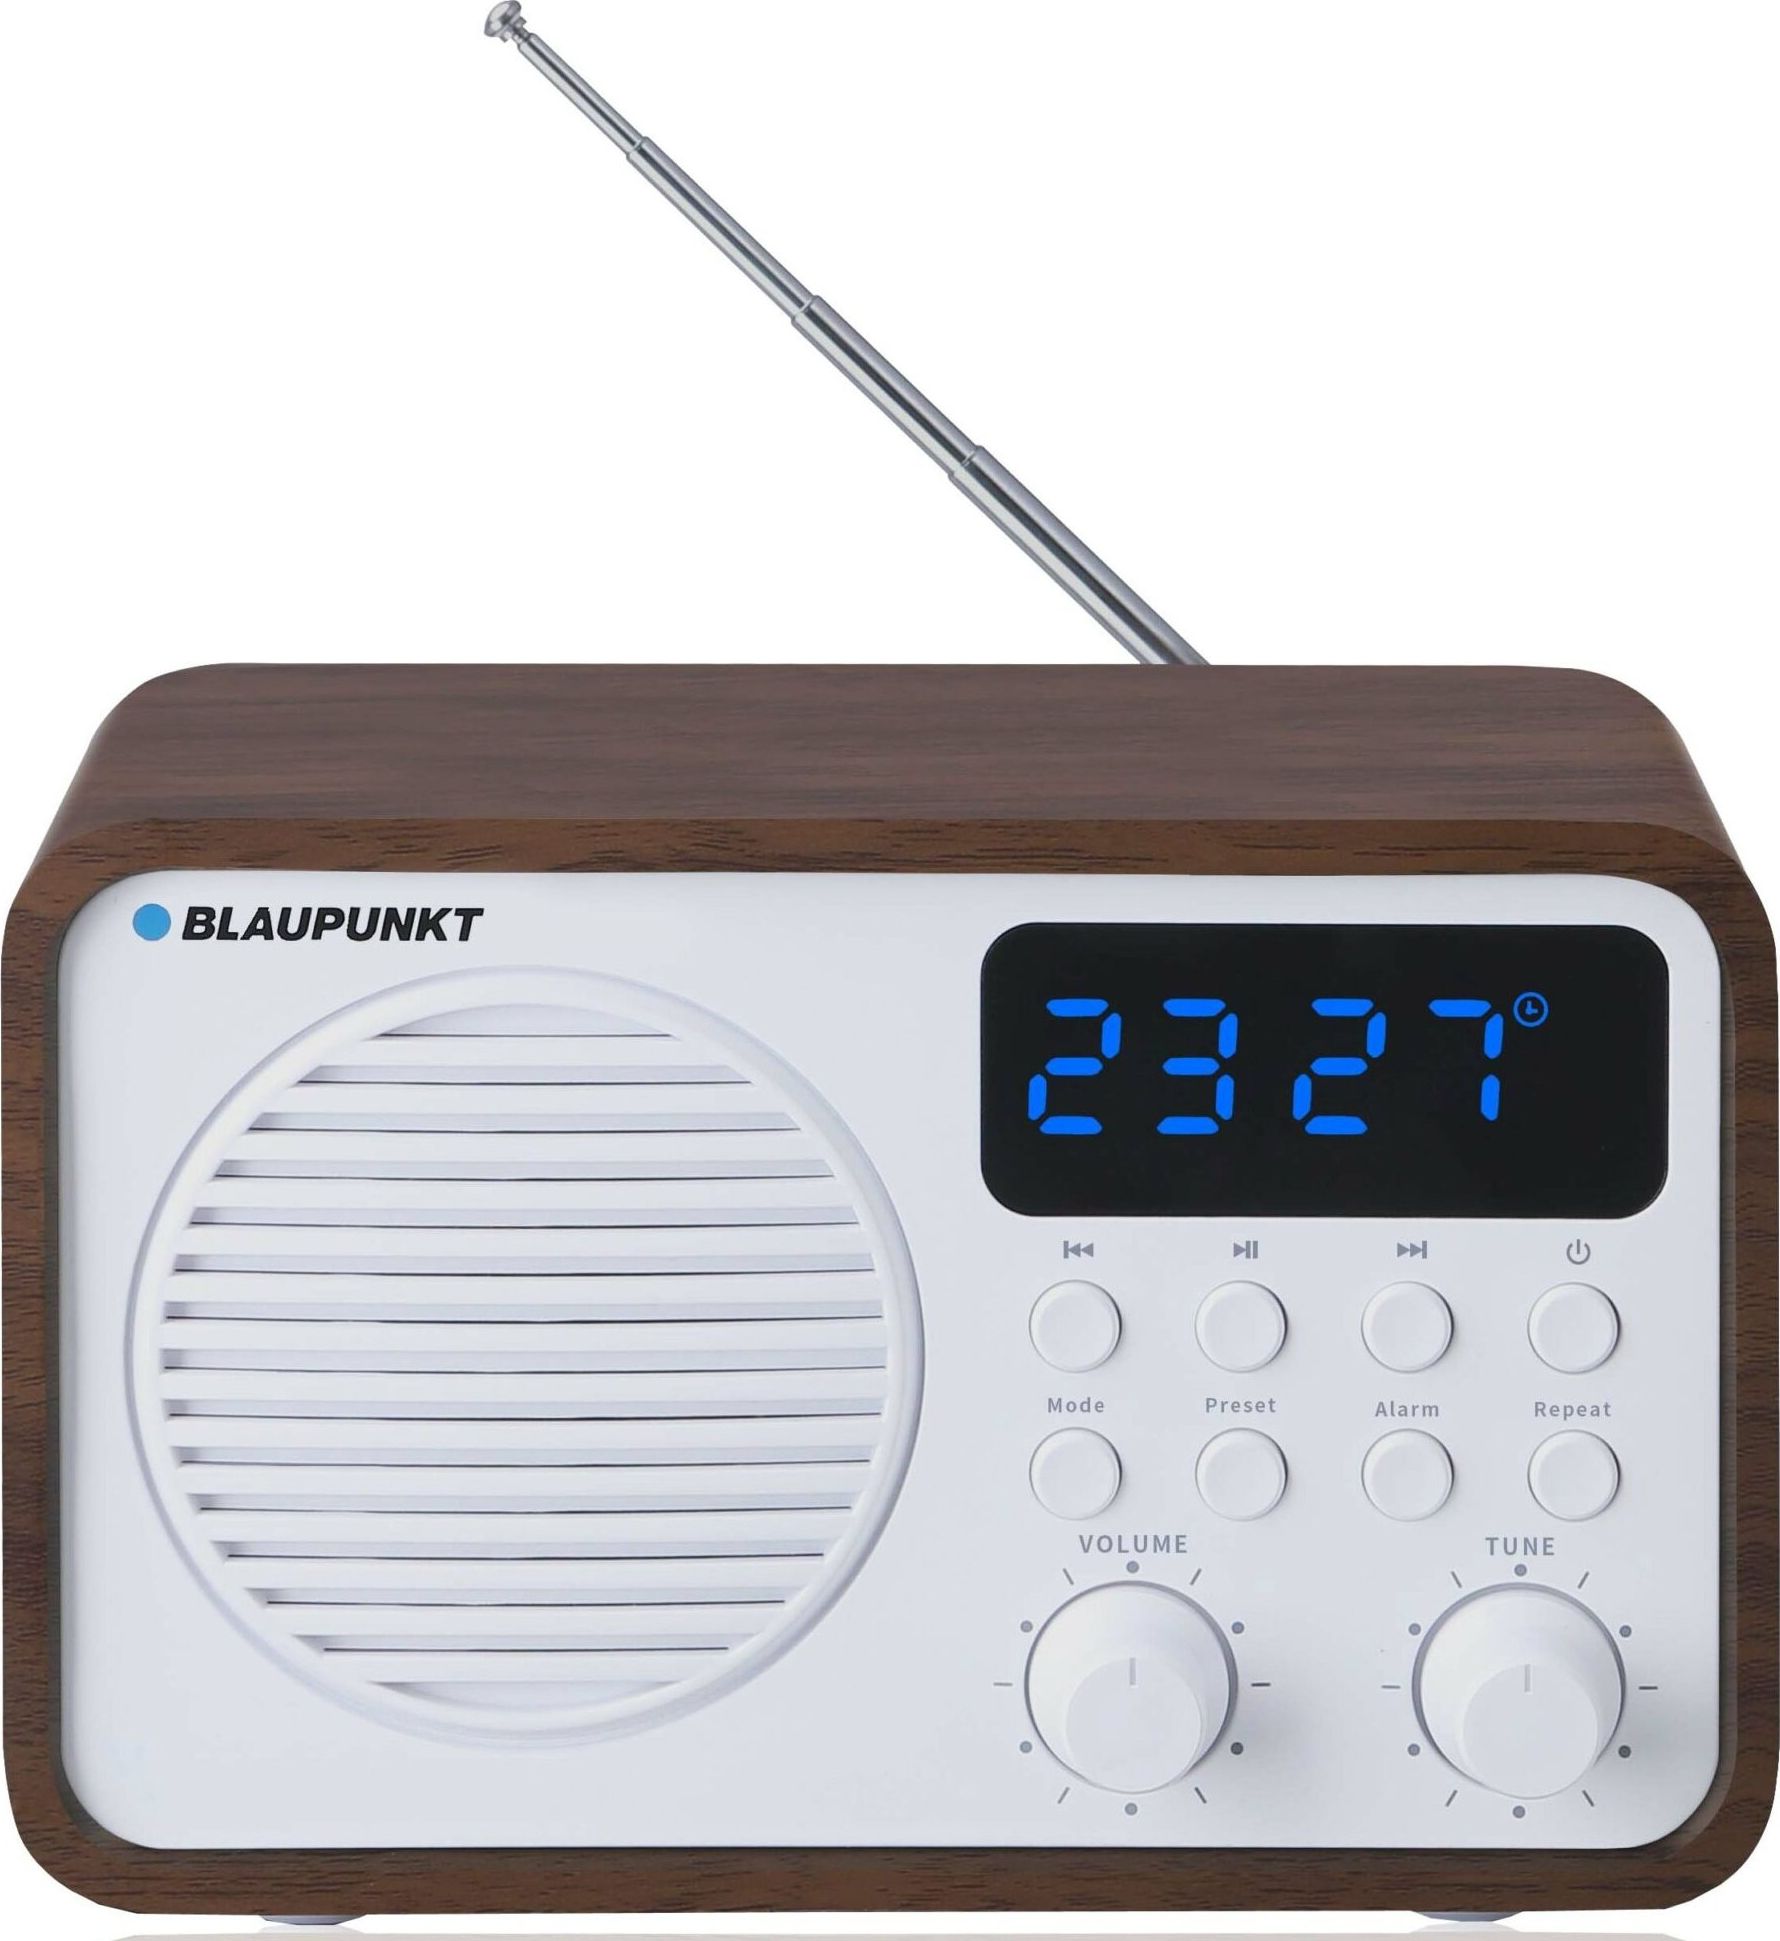 Portable radio with Bluetooth and USB BLAUPUNKT PP7BT, colour: brown wood/white magnetola